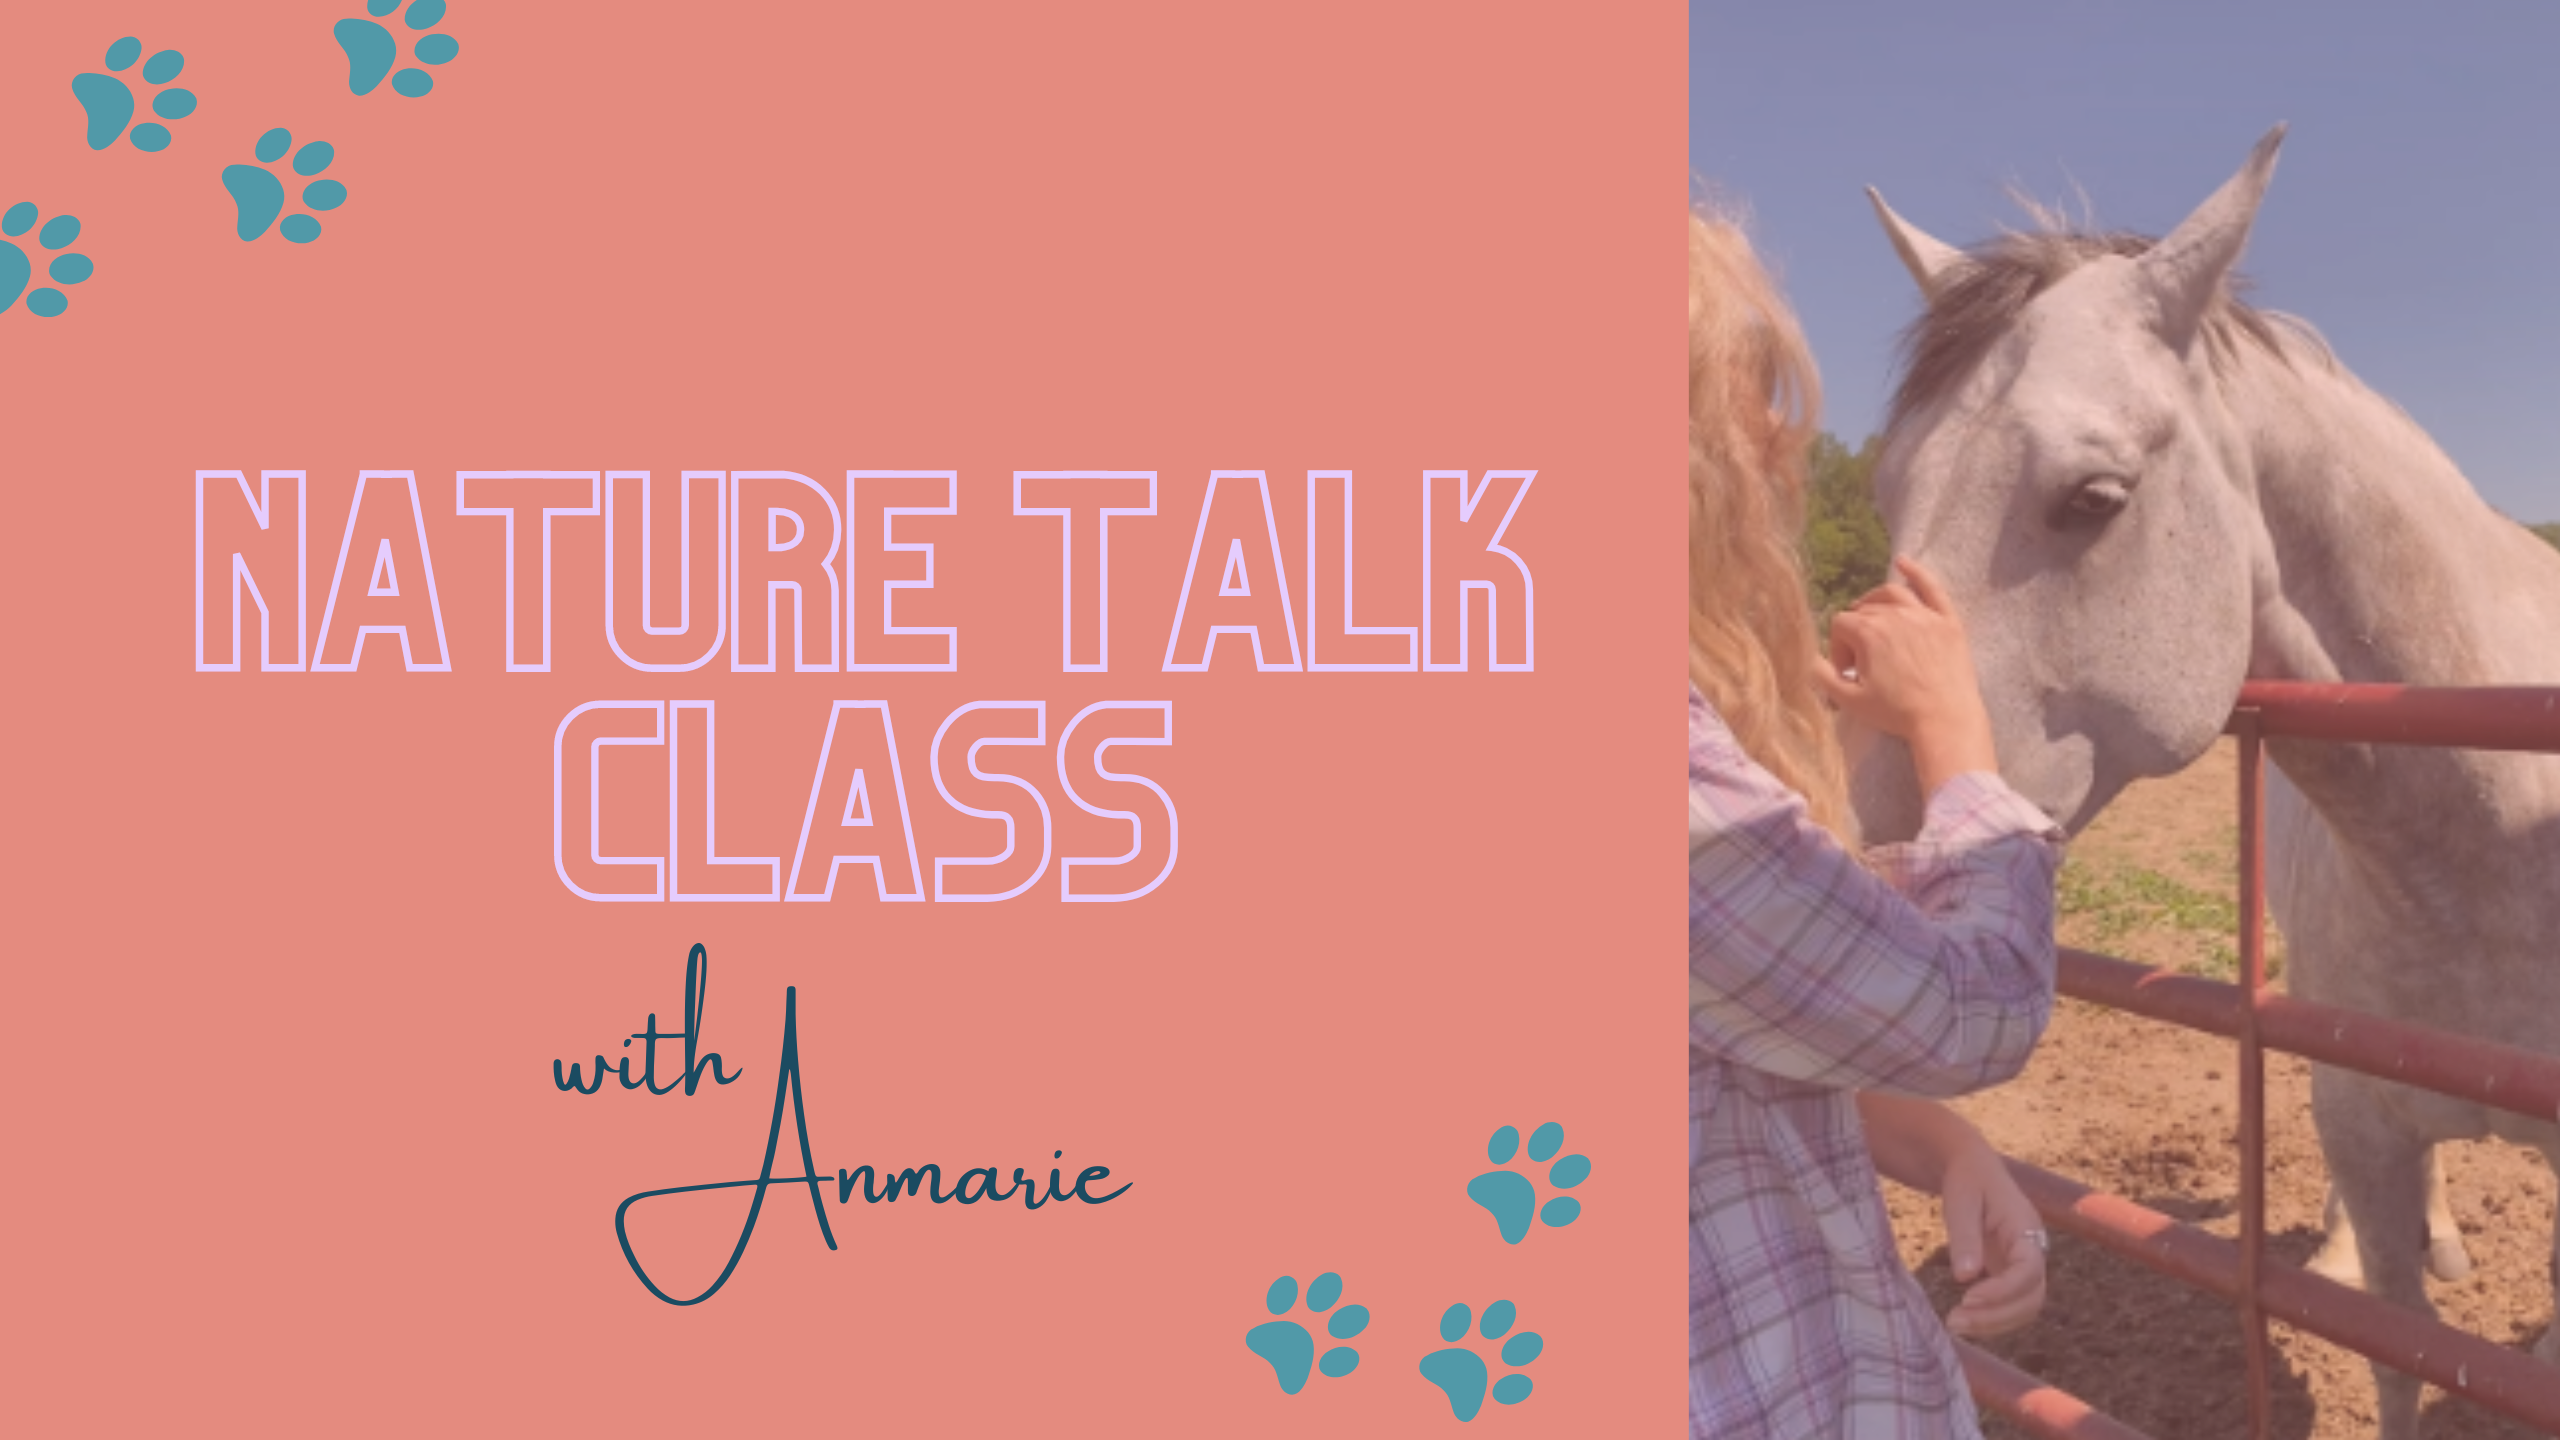 Join this replay of a live class based on my book "Nature Talk". Speak with animals, plants, crystals & trees!